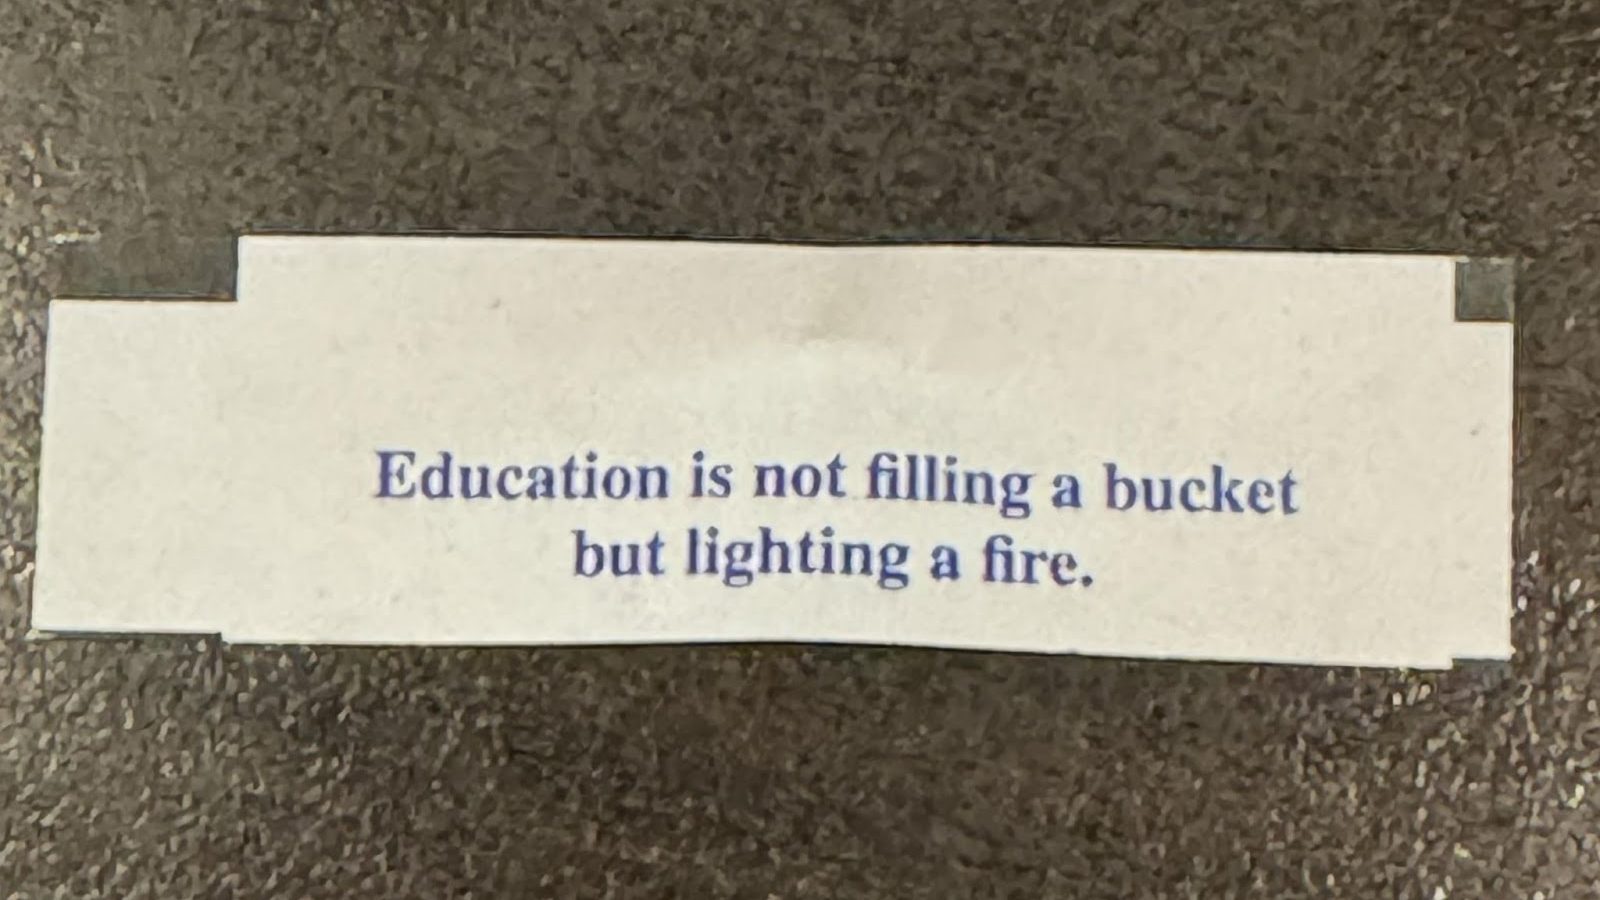 A picture of a fortune from fortune cookie that states Education is not filling a bucket but lighting a fire.